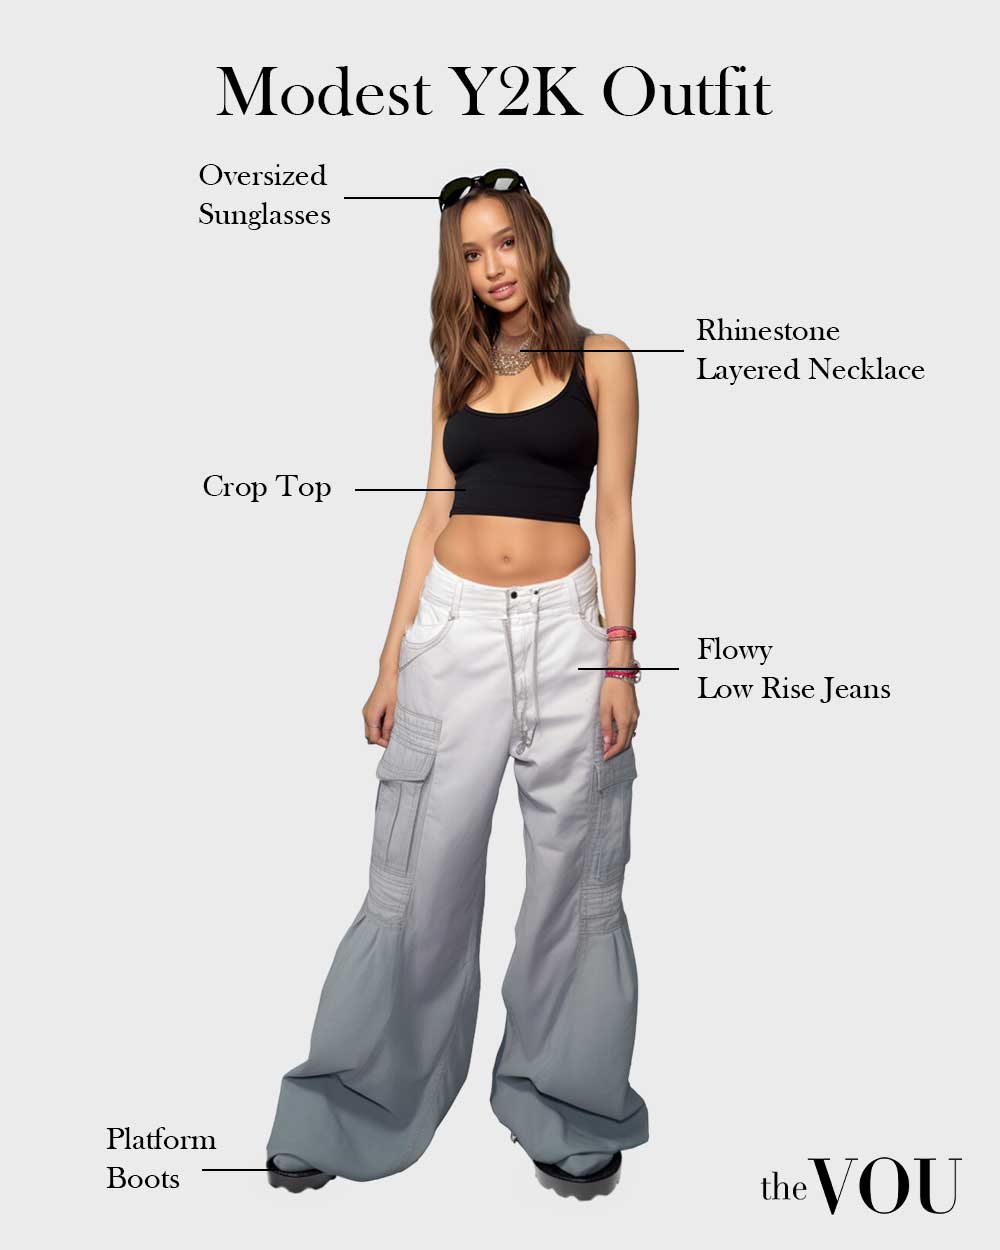 Modest Y2K Style outfit